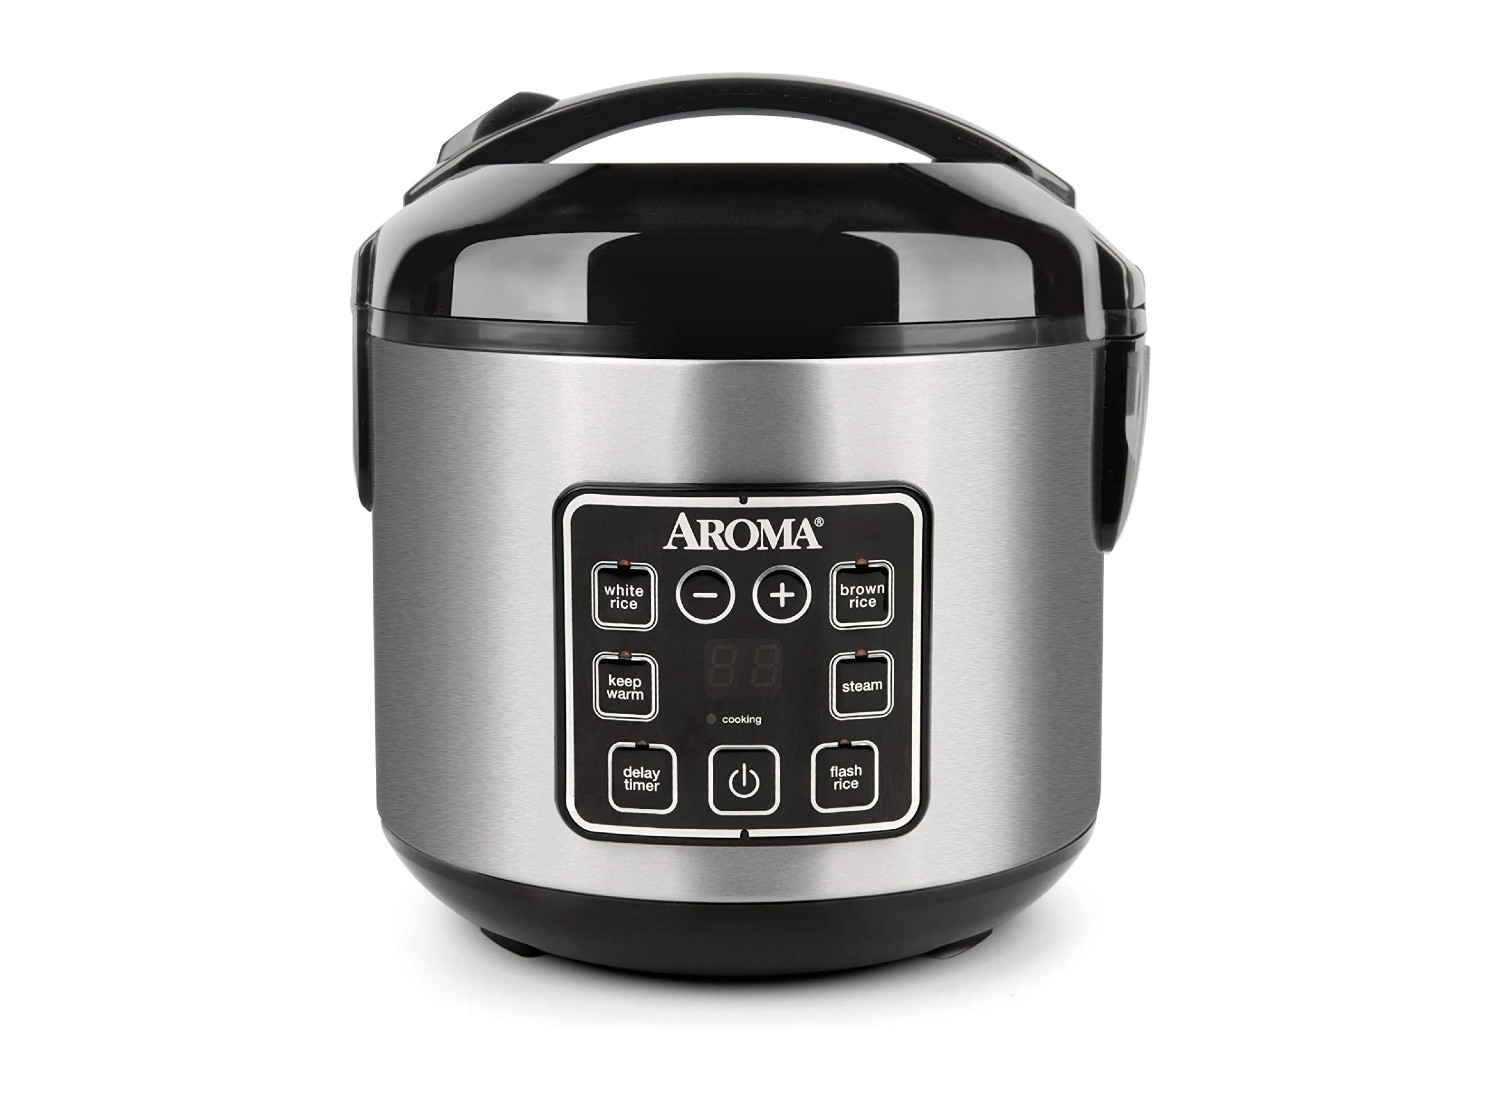 https://www.brit.co/reviews/wp-content/uploads/2023/06/aroma-housewares-rice-cooker-britco.jpg